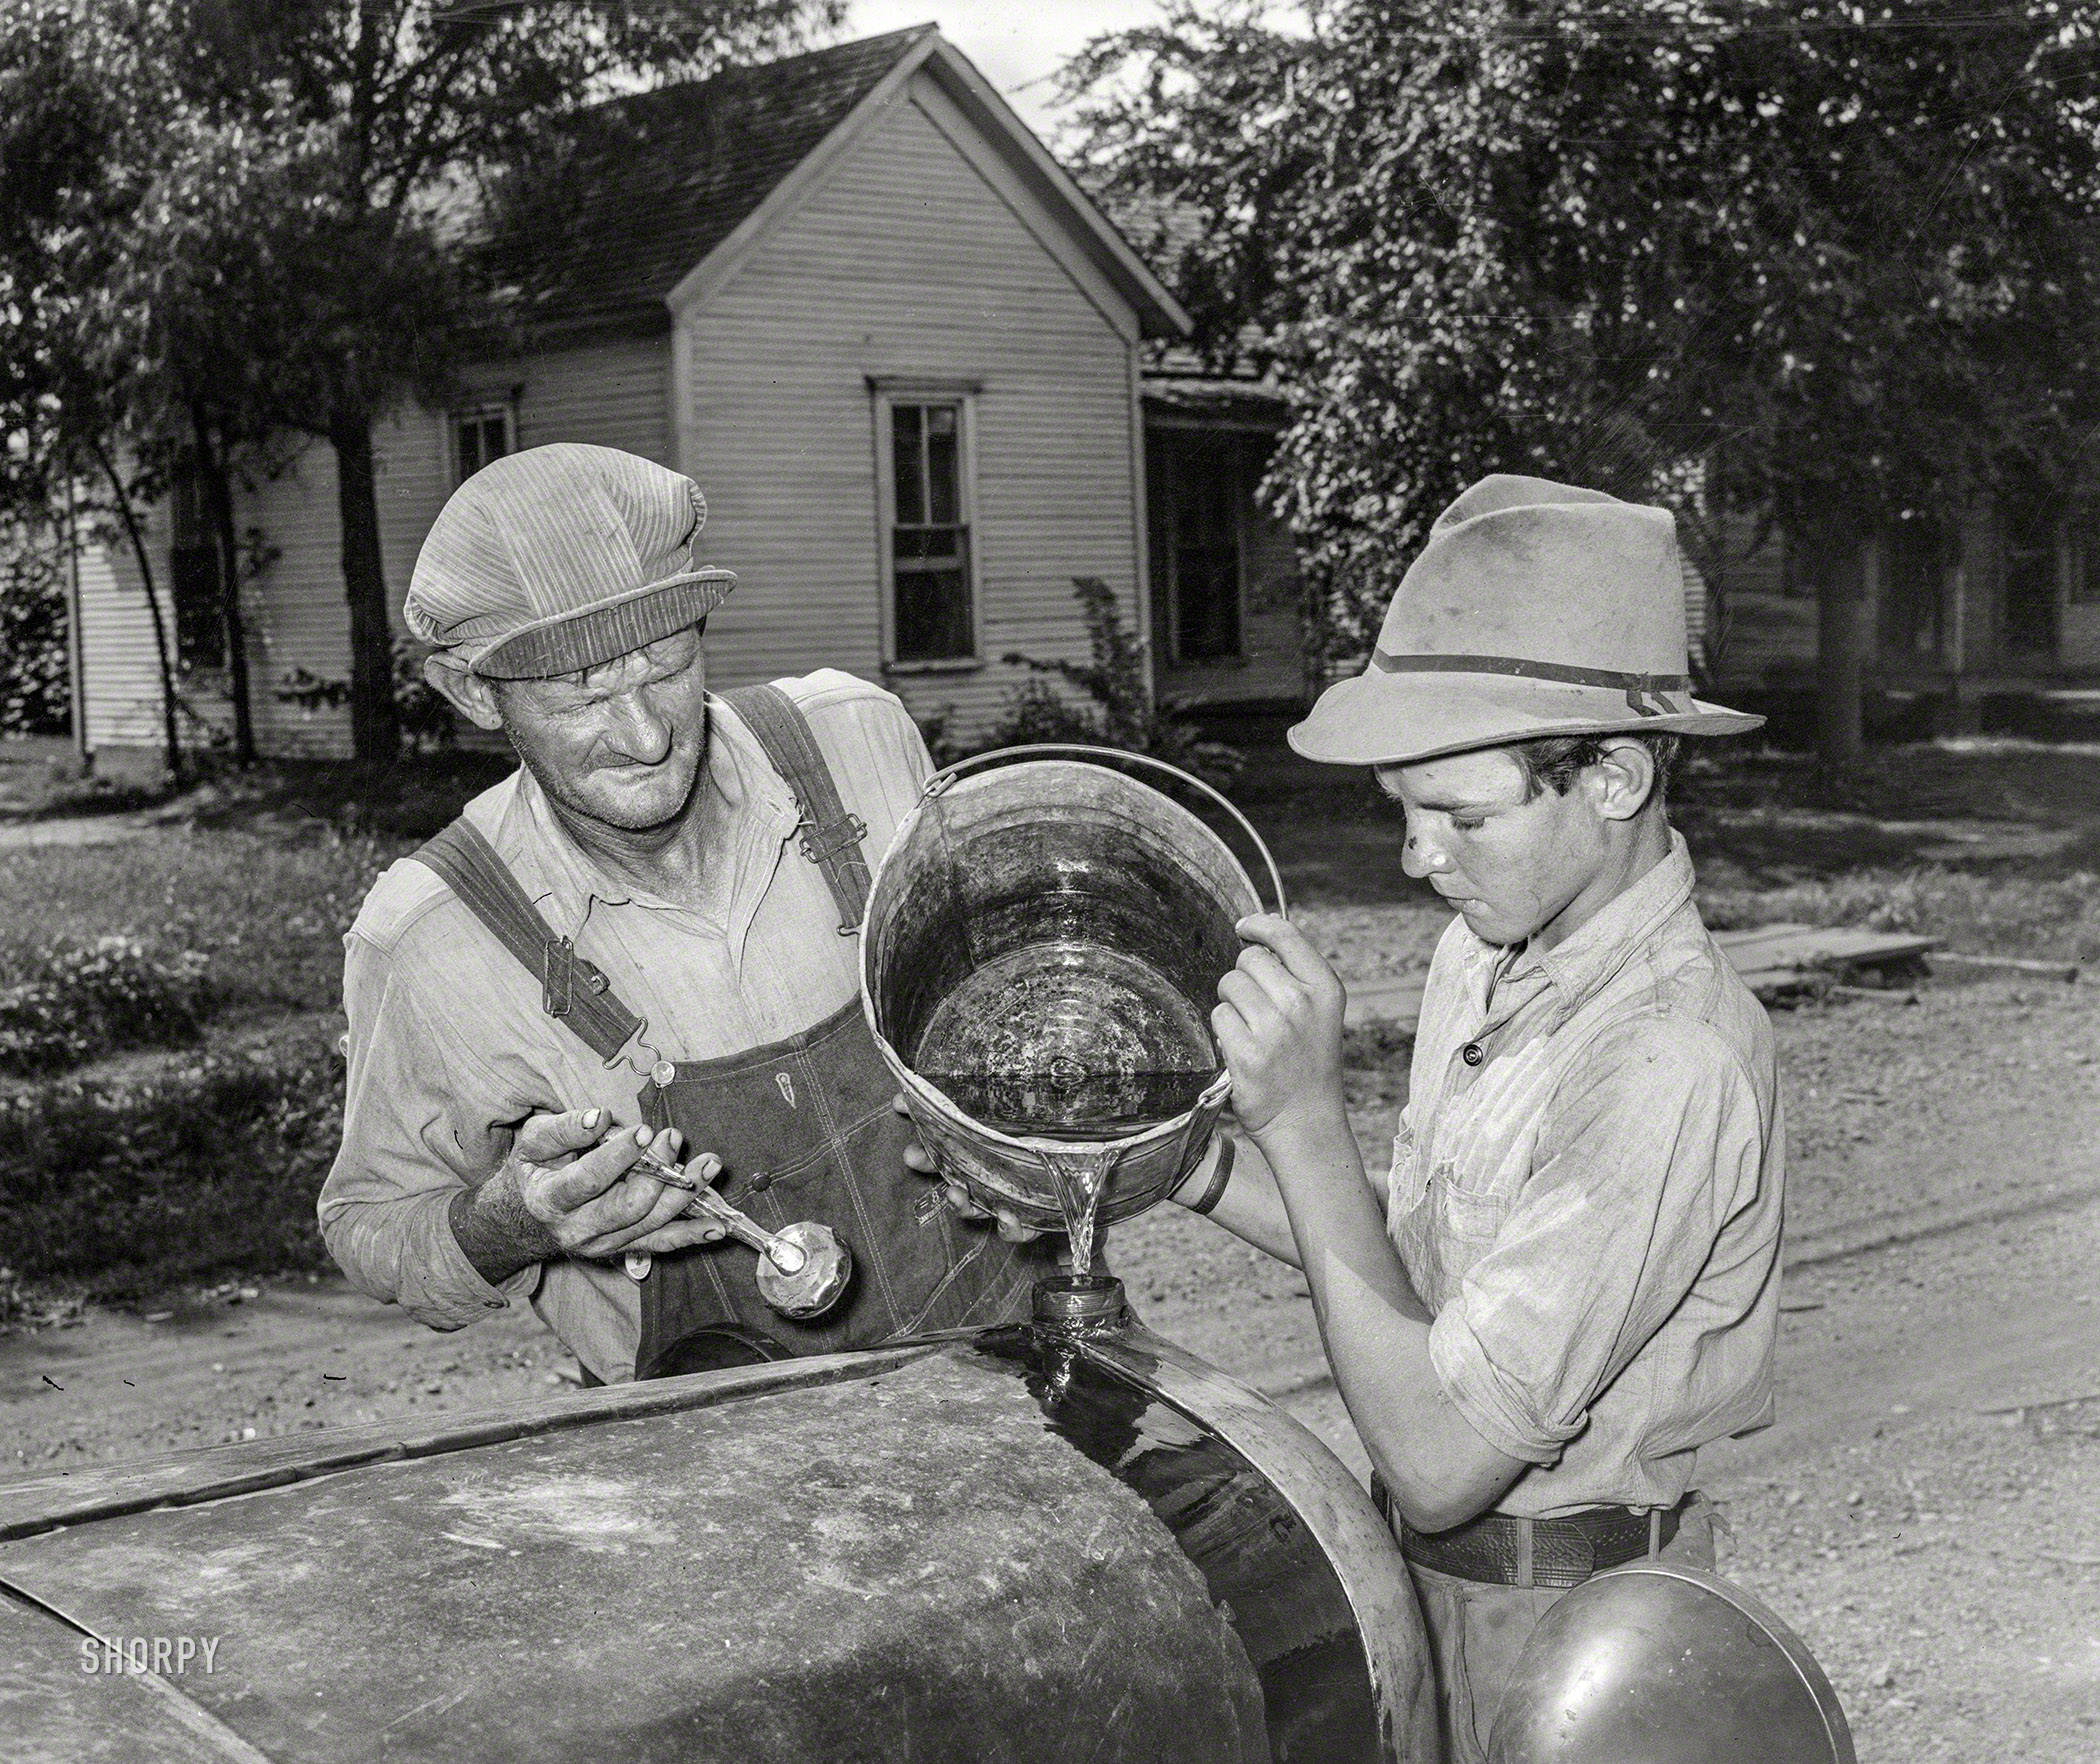 July 1939. "En route to California. Pouring water into radiator of migrants' car in the streets of Muskogee, Oklahoma, where the Elmer Thomas family has stopped to say goodbye to their friends in that town." Medium format acetate negative by Russell Lee for the Farm Security Administration. View full size.